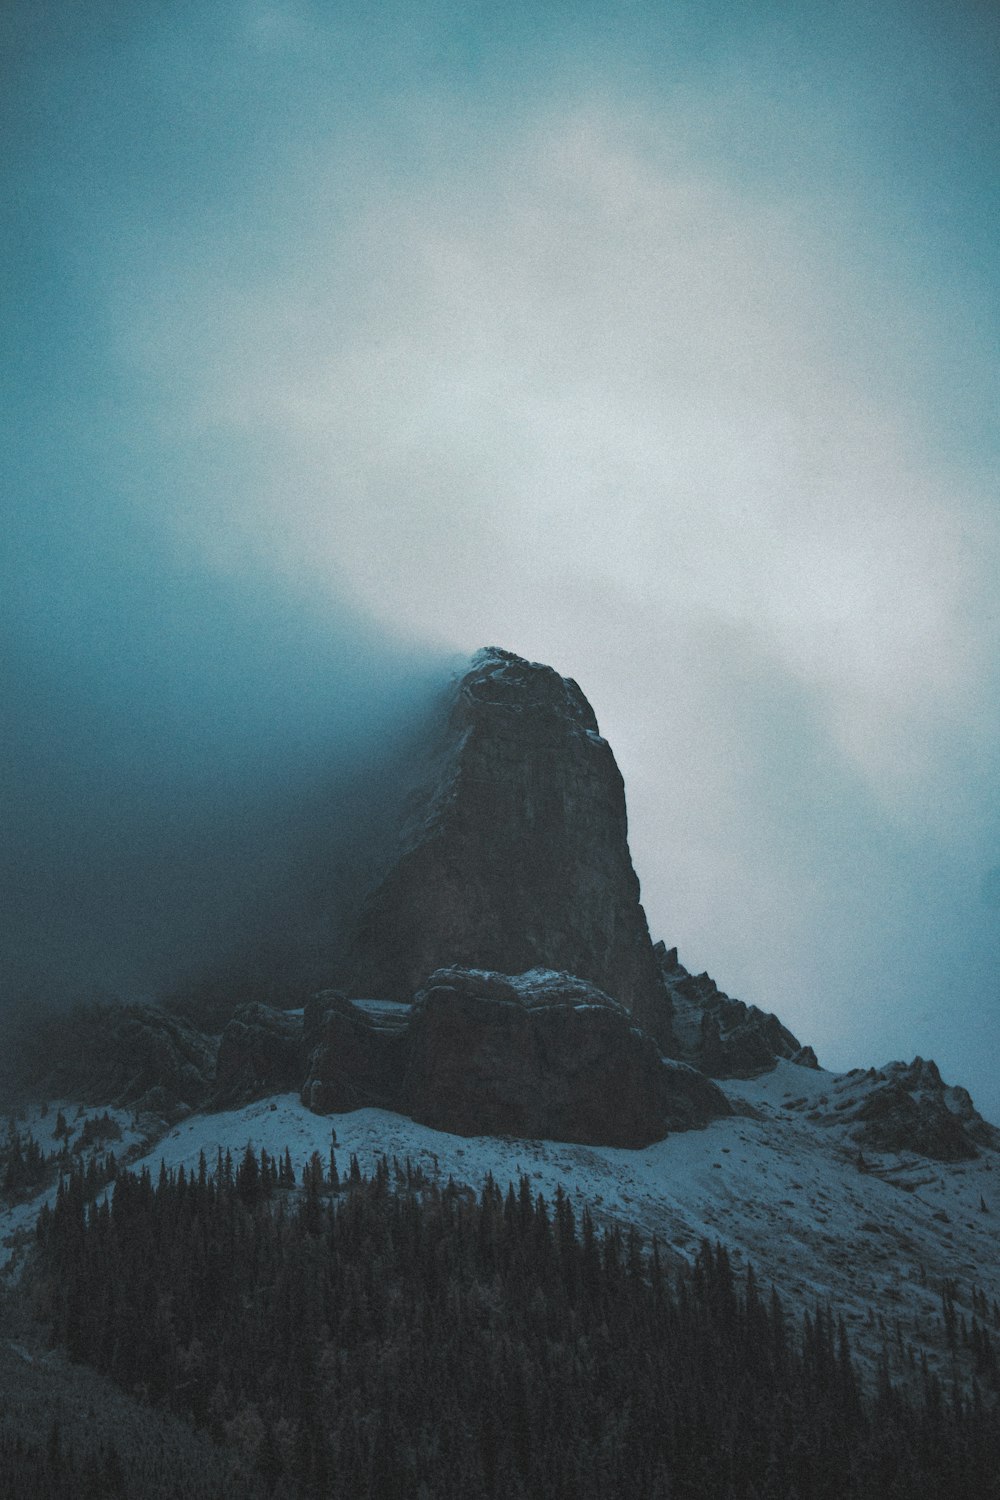 a mountain covered in snow and fog under a cloudy sky